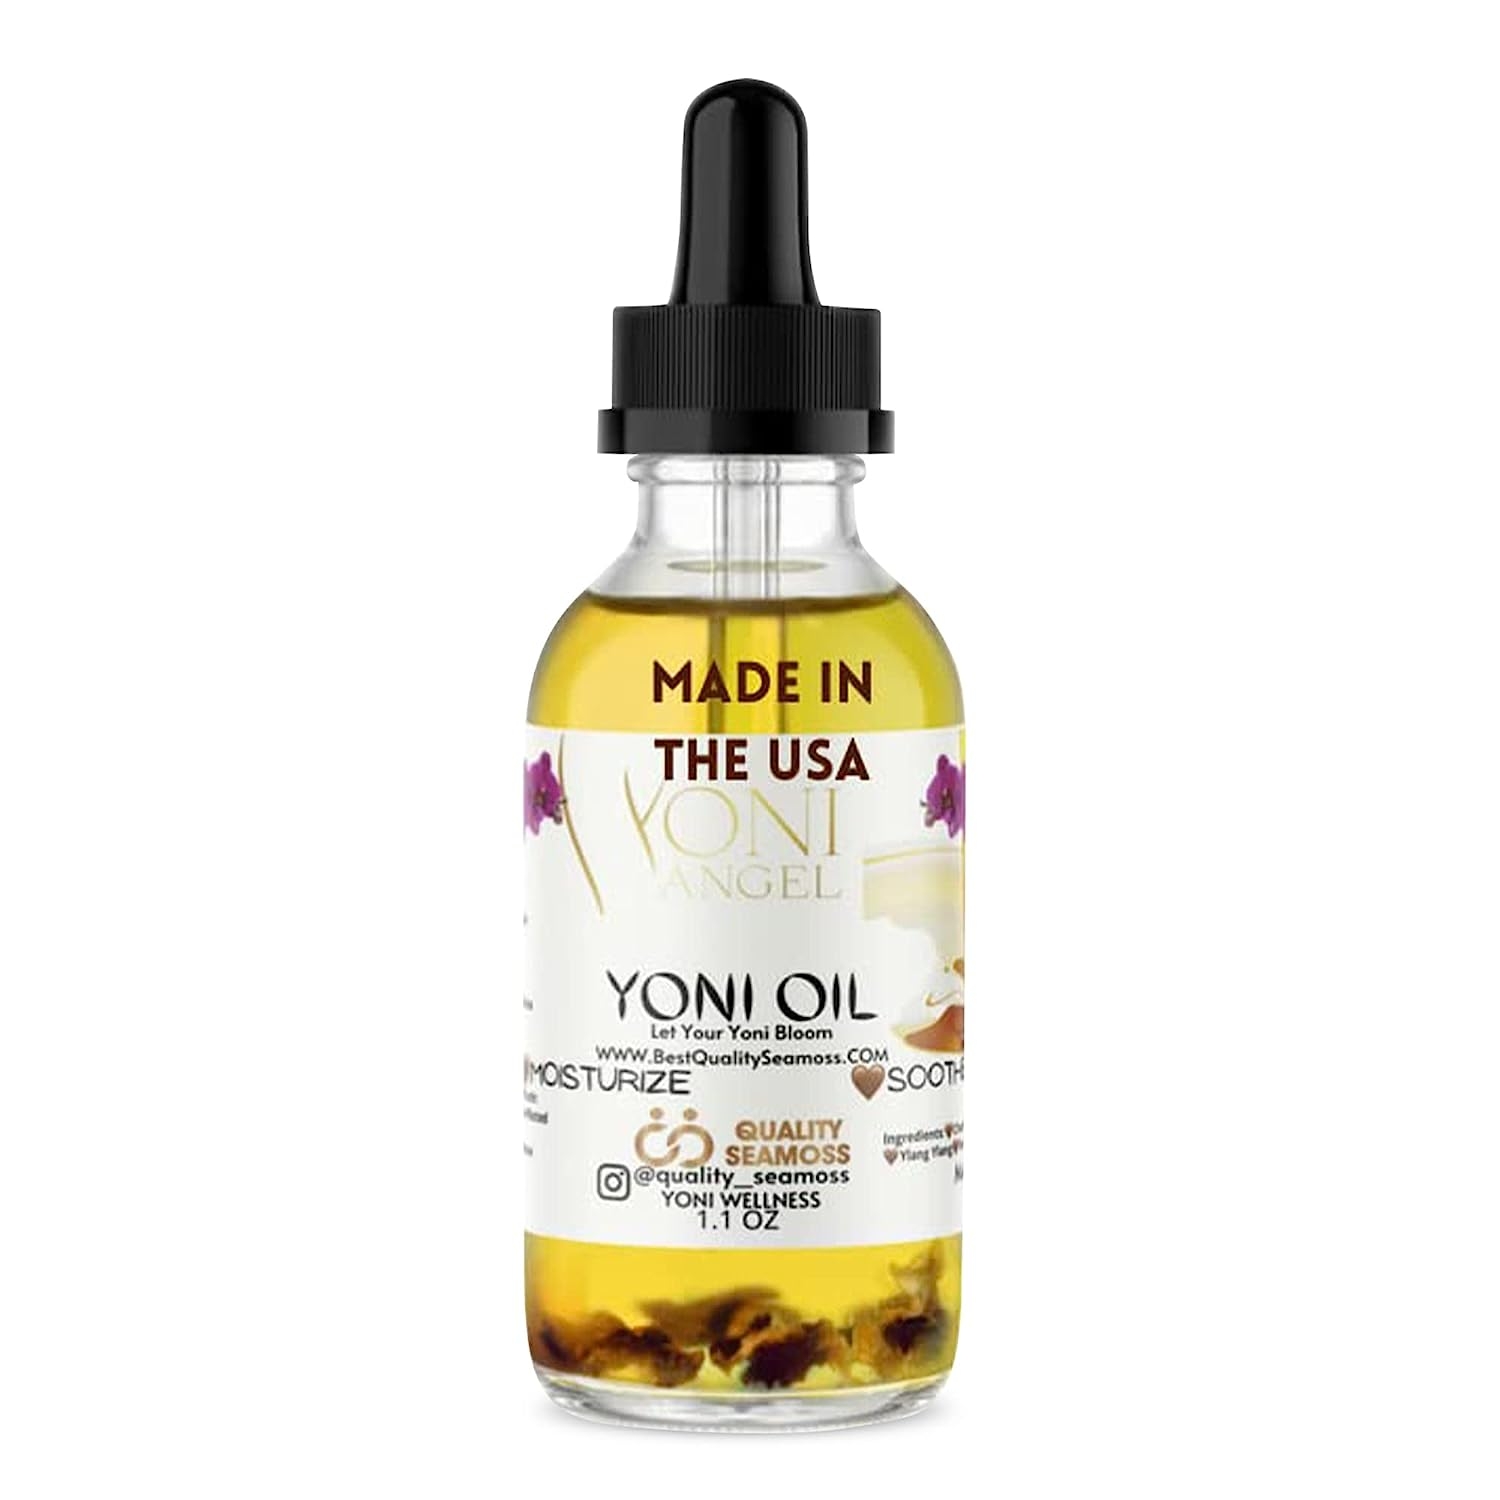 USA Made Yoni Oil Feminine Oil Eliminates Odor PH Balance Moisturizer. Soothes Razor Bumps Heals and soothes Ingrown Hair